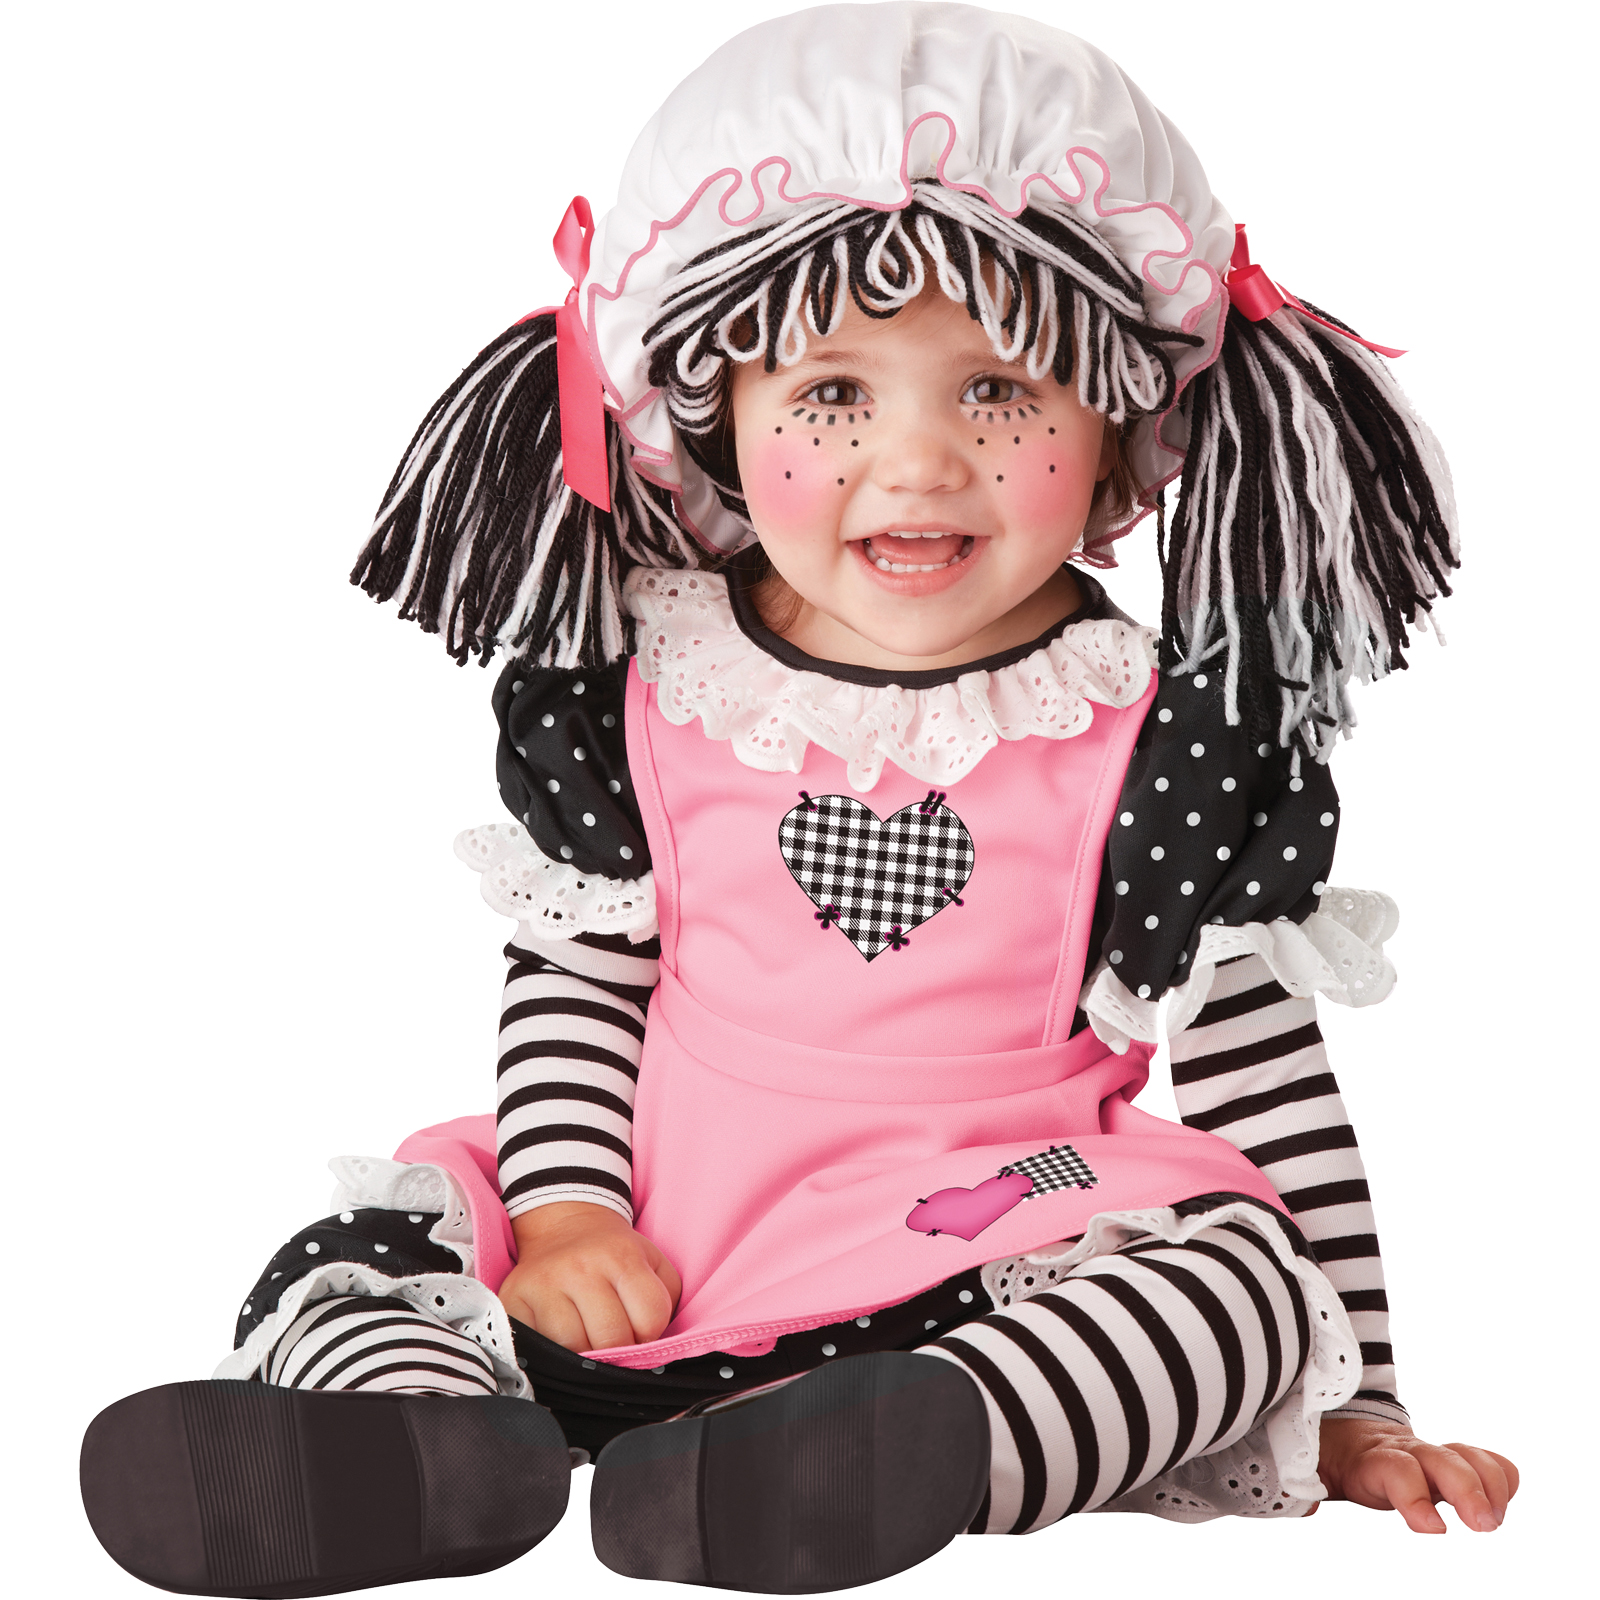 Infant Baby Doll Costume Size: 18-24 months